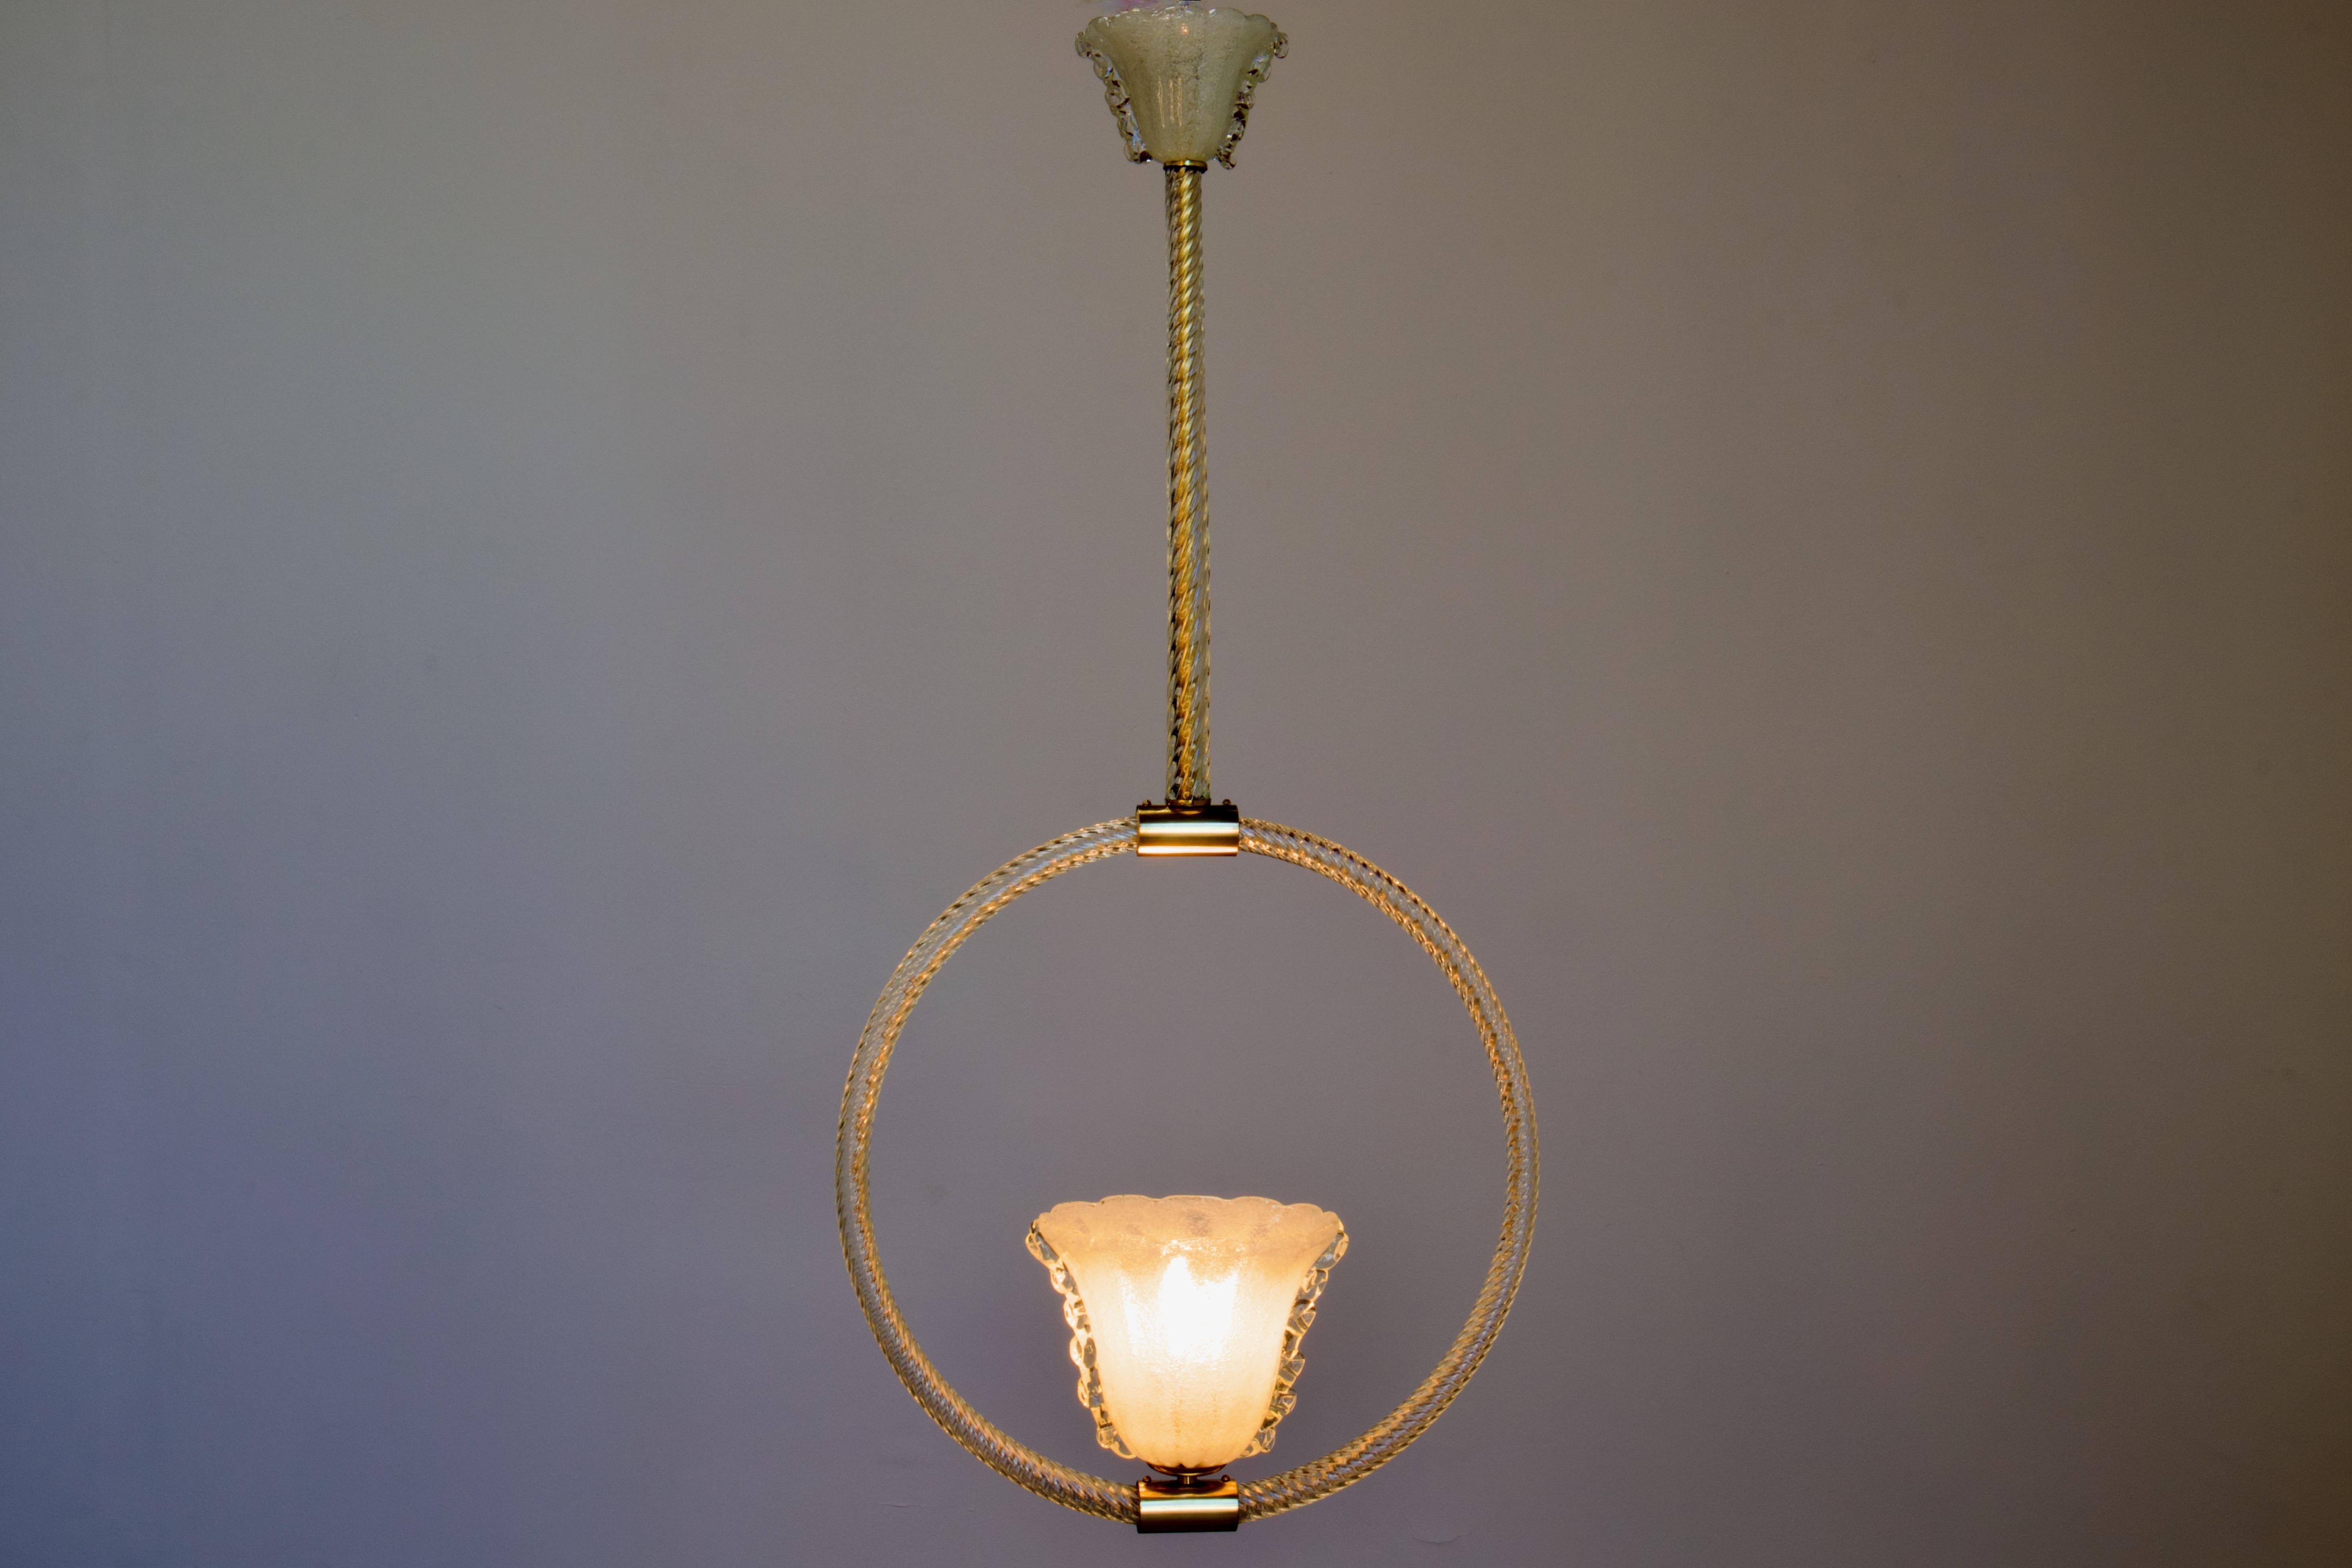 Stunning, fully restored, 1930s Italian Art Deco Pendant By Barovier & Toso. Made of Murano Glass, hand made in Venice, Italy, this fixture features a polished brass frame, wrapped in transparent twisted art glass, and supporting a Pulegoso (bubbled